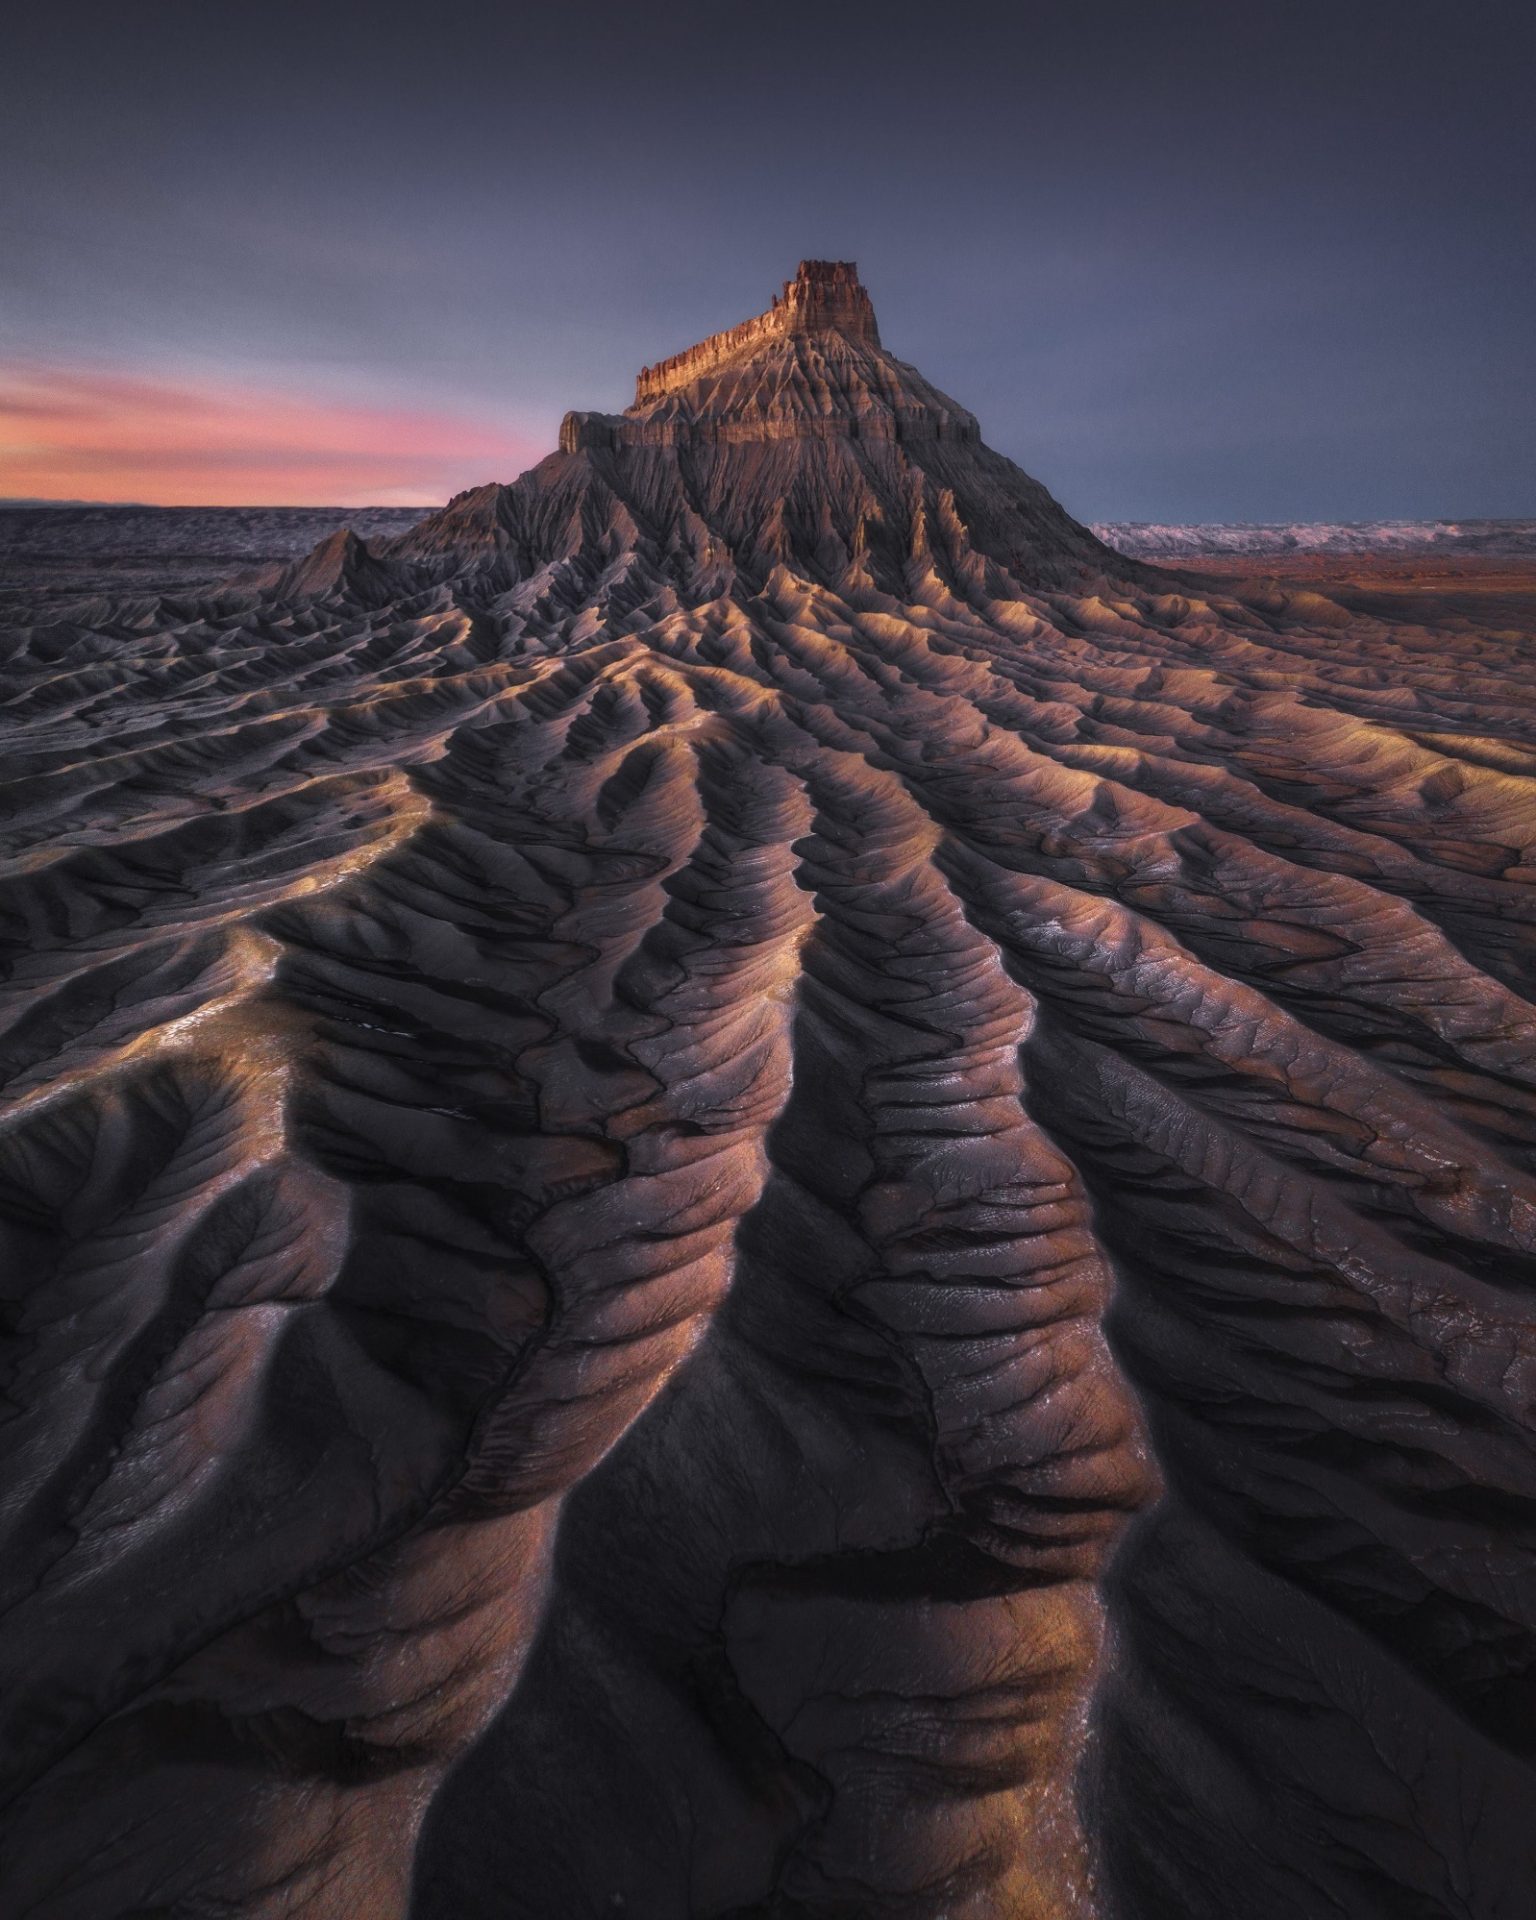 The winners of the 2020 landscape photography competition